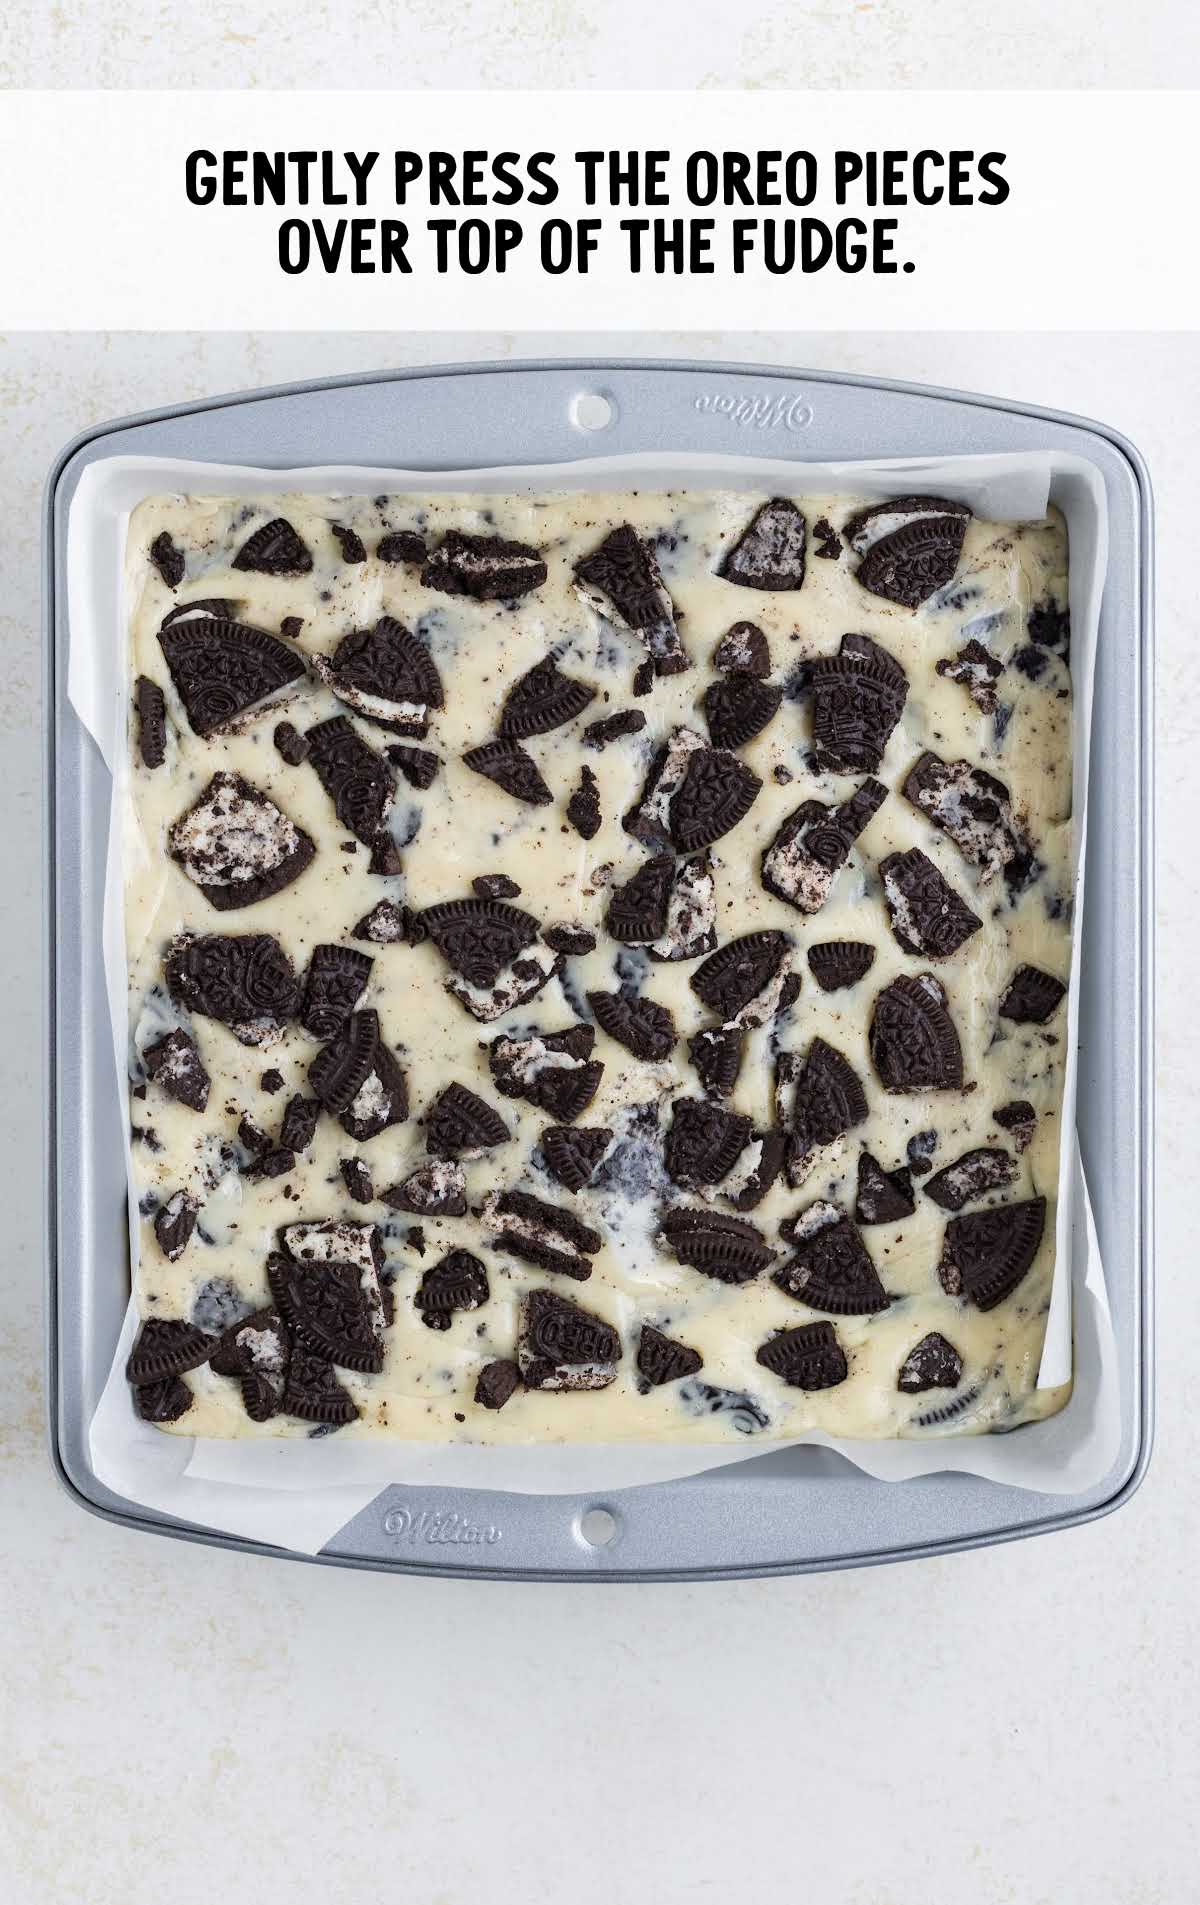 oreos sprinkled on top of the fudge mixture in a pan